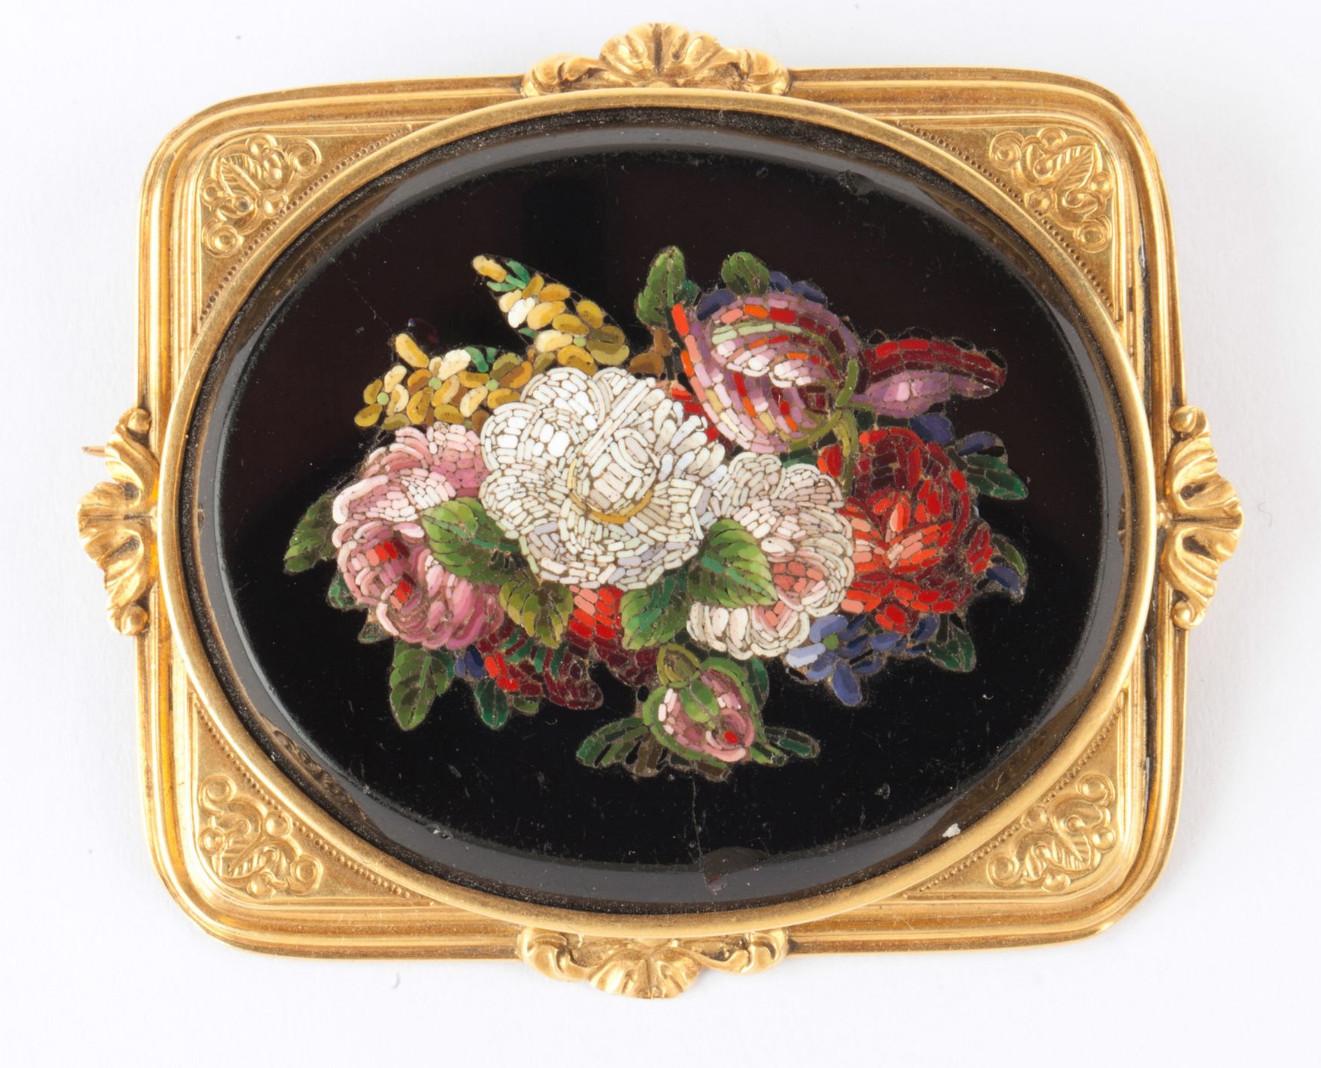 SHIPPING POLICY:
No additional costs will be added to this order.
Shipping costs will be totally covered by the seller (customs duties included). 


Oval medallion set with a micro-mosaic of flowers with engraved acanthus frame. Work from the